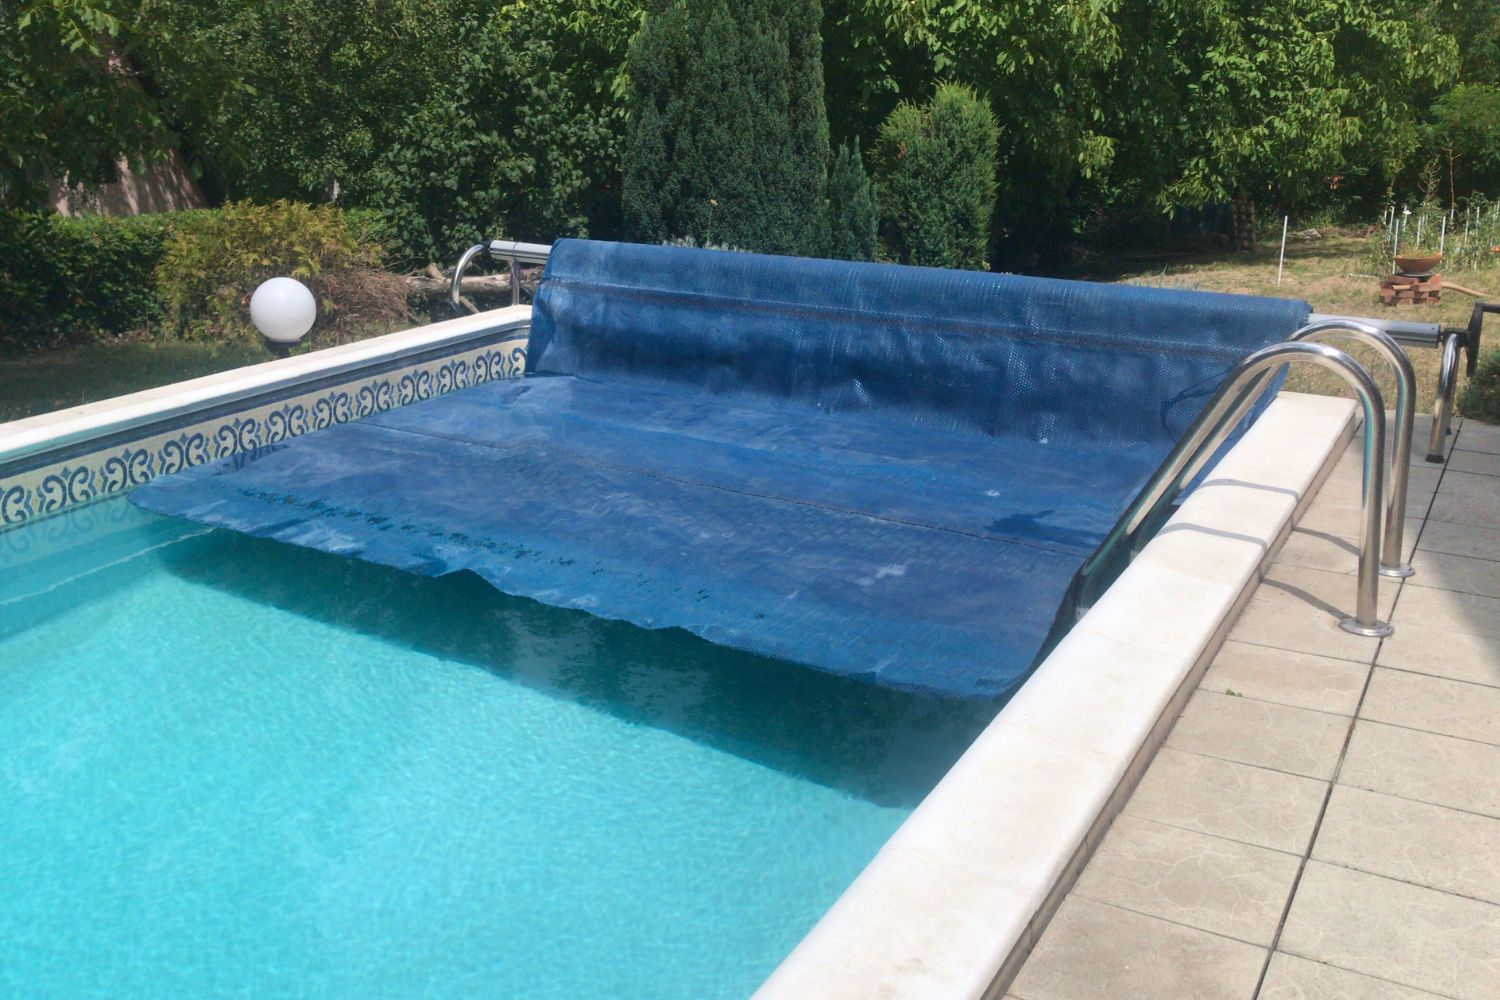 Automatic Pool Cover